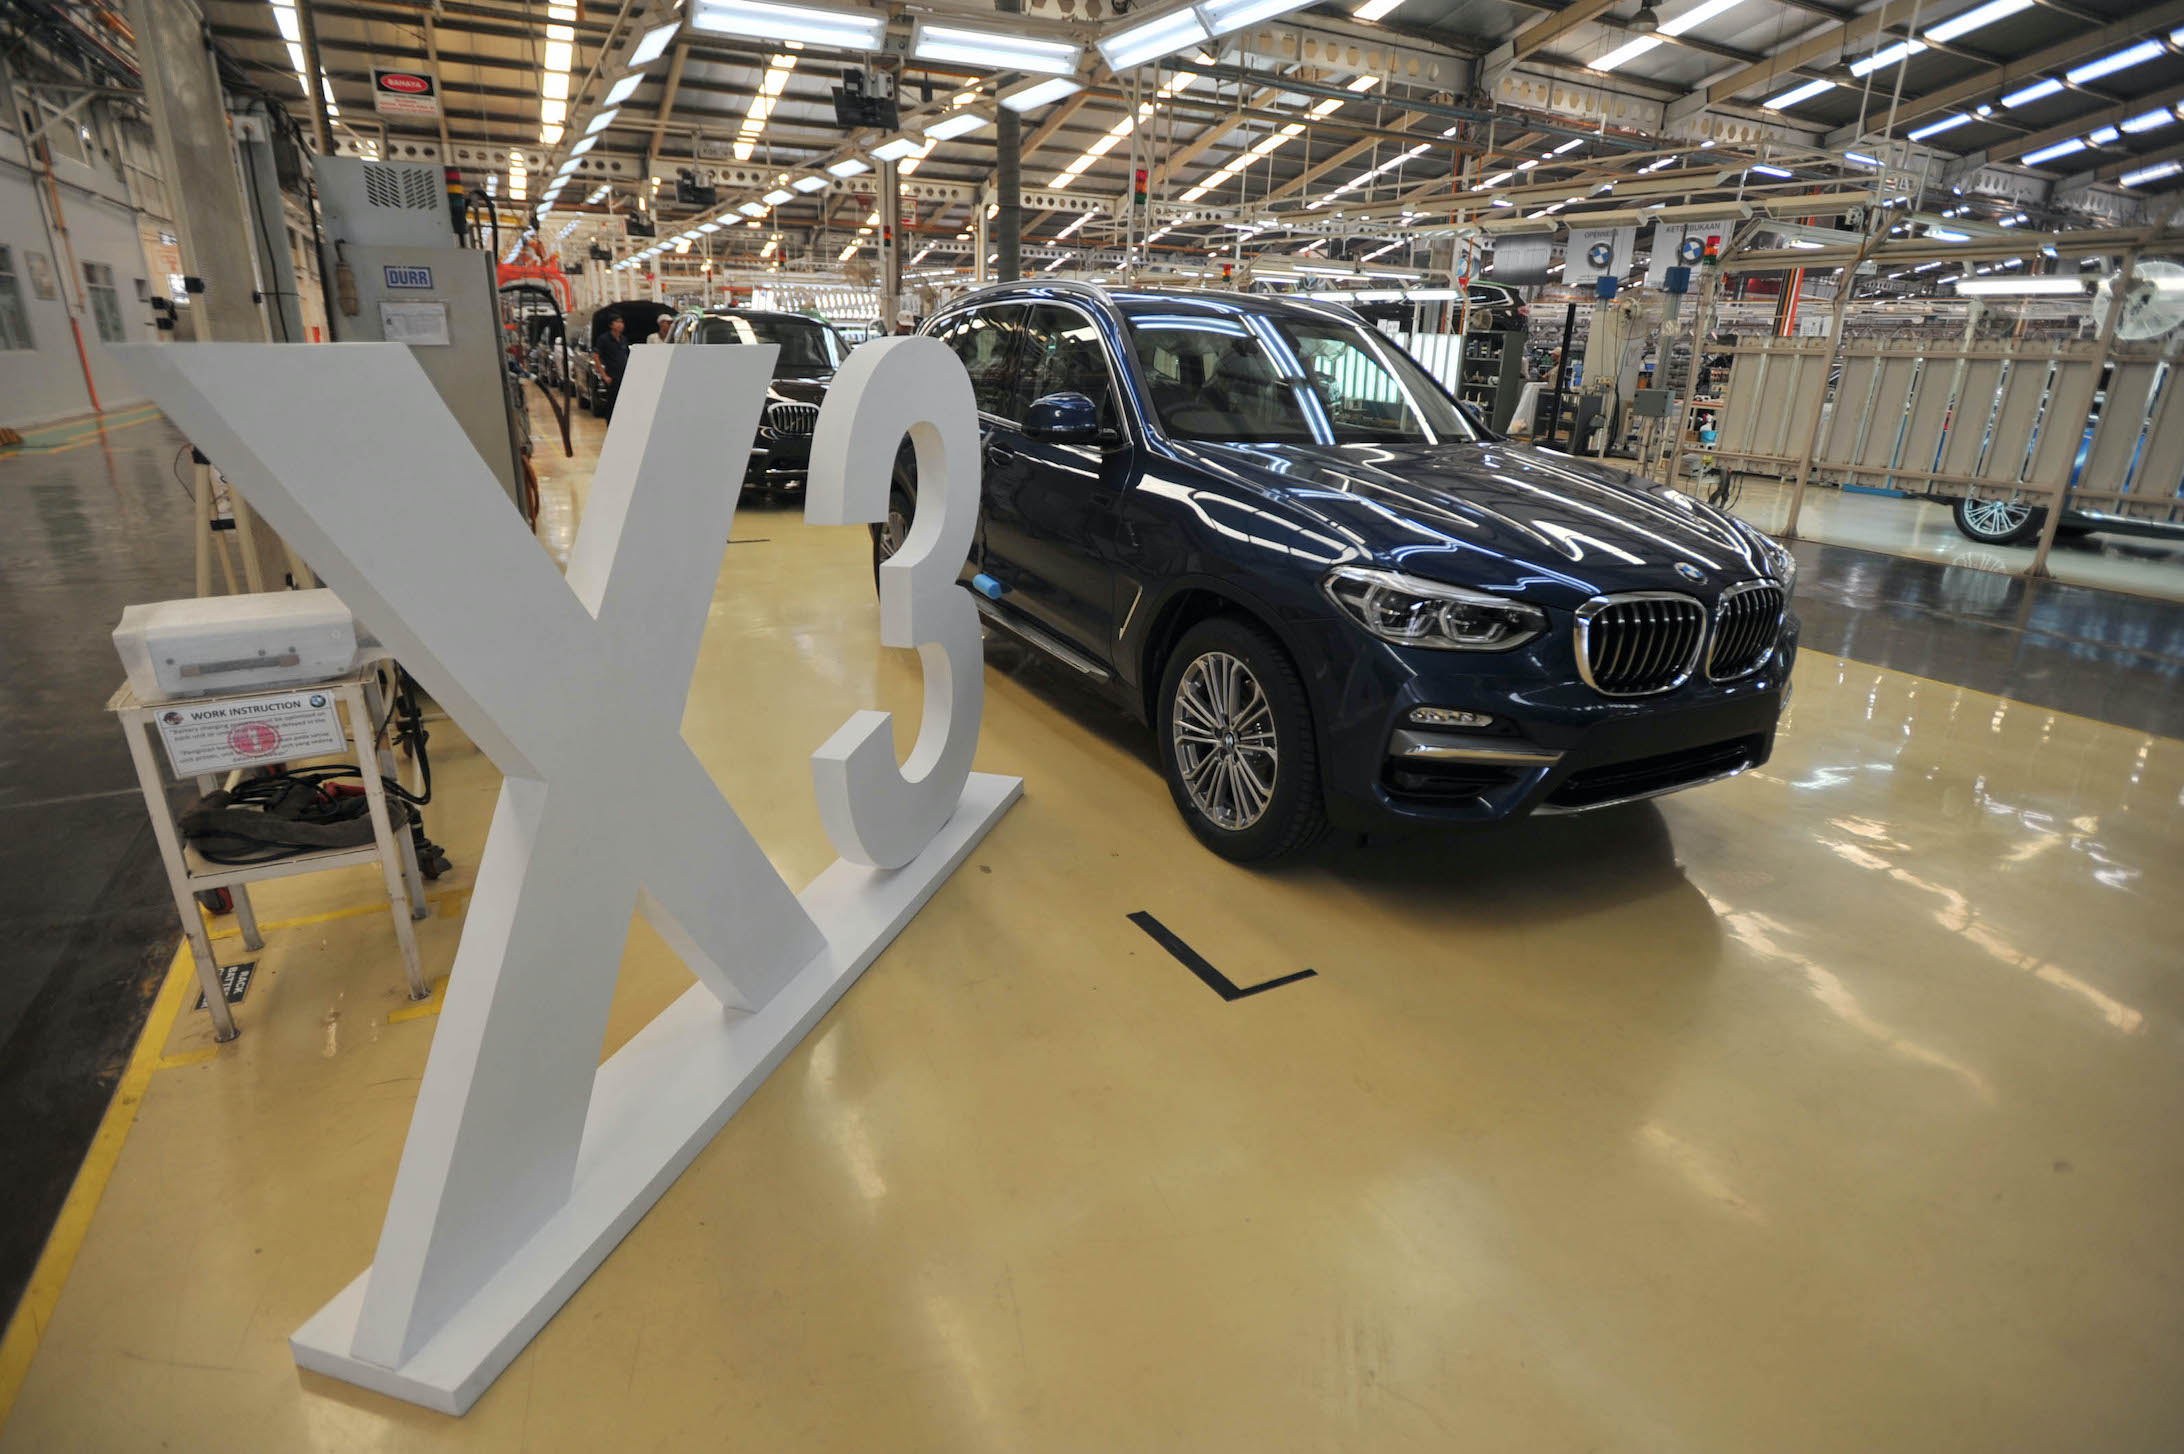 Workers assembly BMW X3, rival to the Lincoln Corsair, at PT Gaya Motor manufacture in Jakarta, Indonesia on July 18, 2018